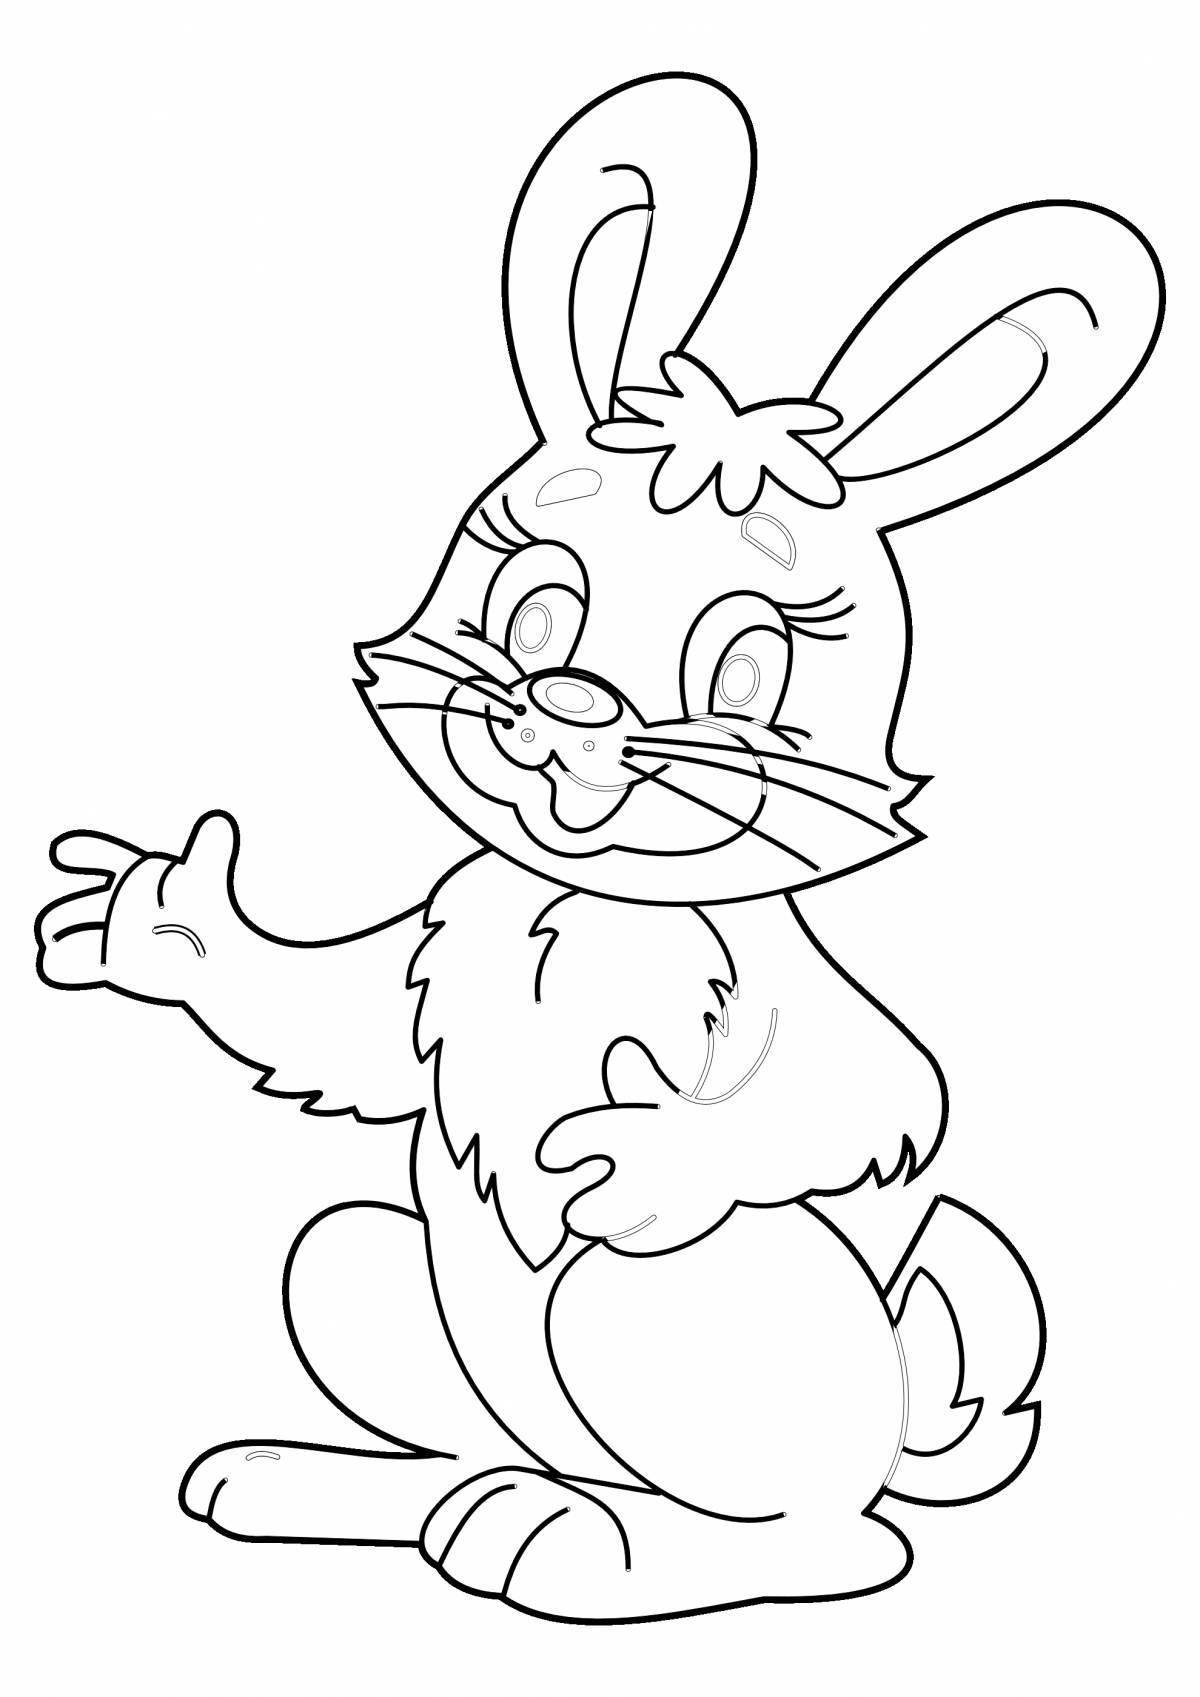 Coloring page happy rabbit and cat